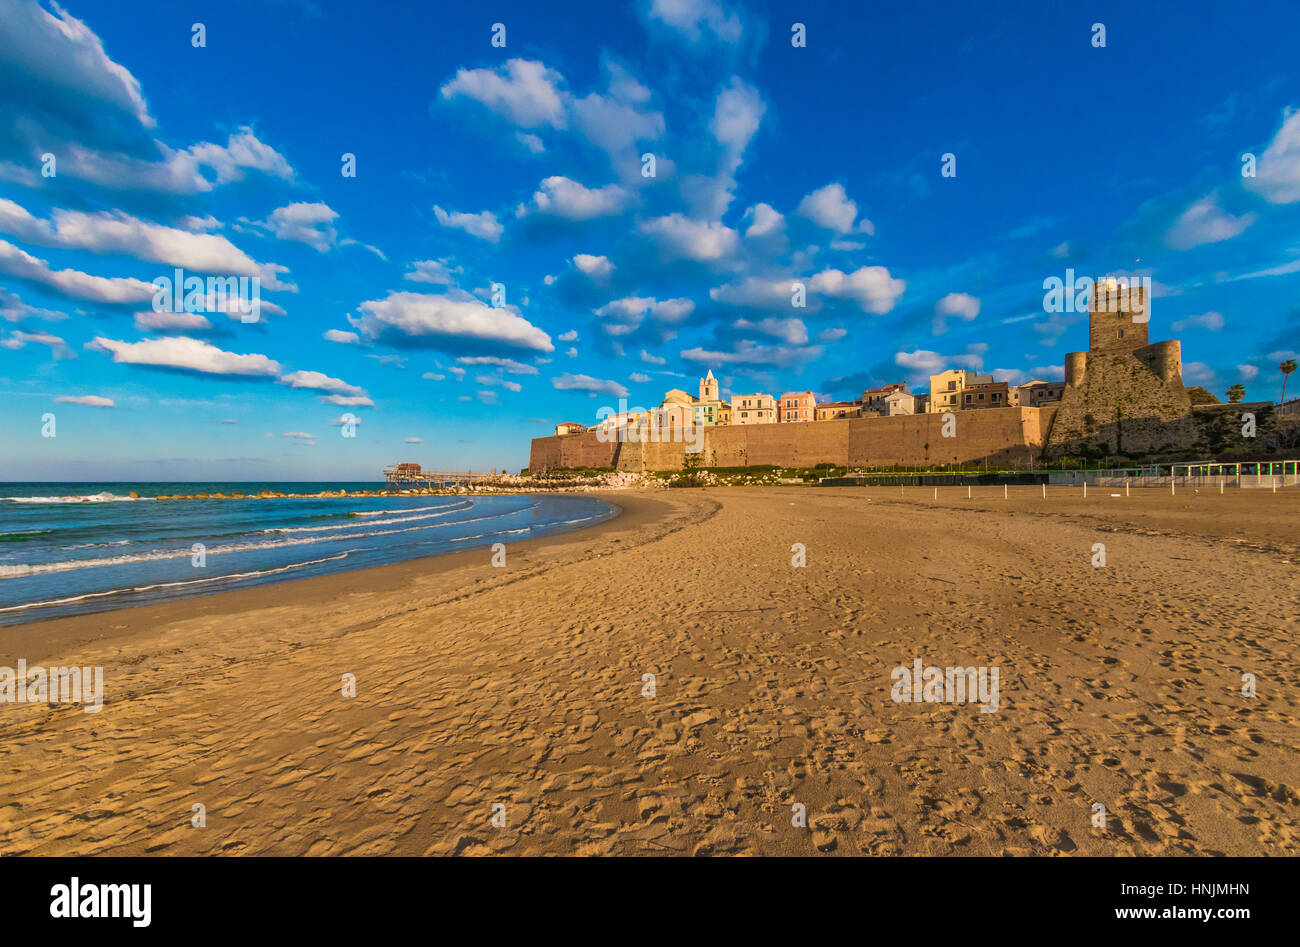 Termoli (Italy) - A touristic city on Adriatic sea in the province of Campobasso, Molise region, southern Italy Stock Photo